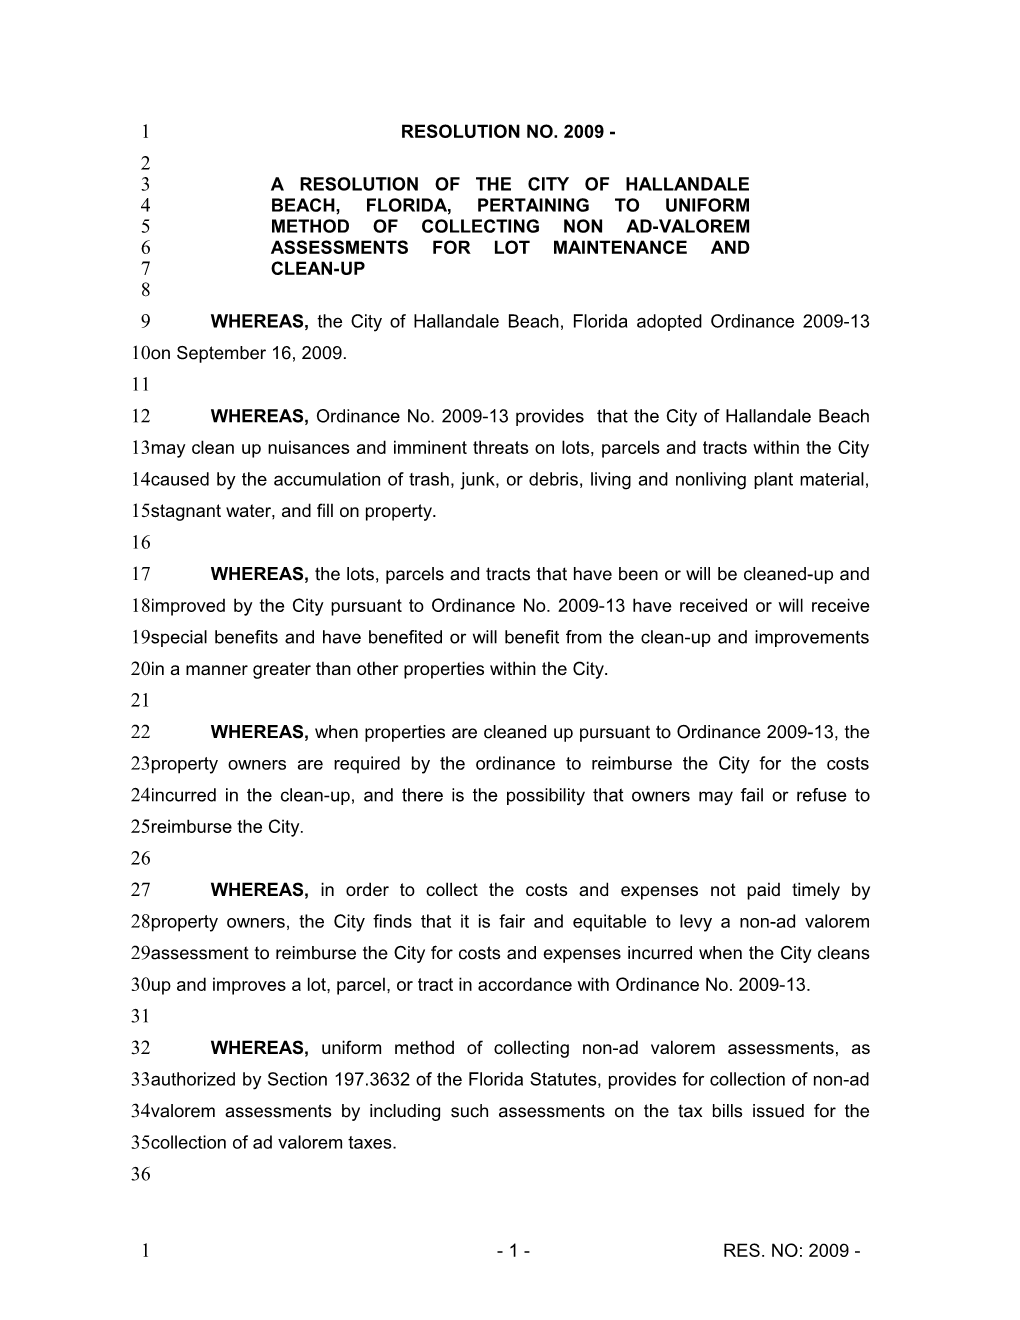 A Resolution of the City of Hallandale Beach, Florida, Pertaining to Uniform Method Of